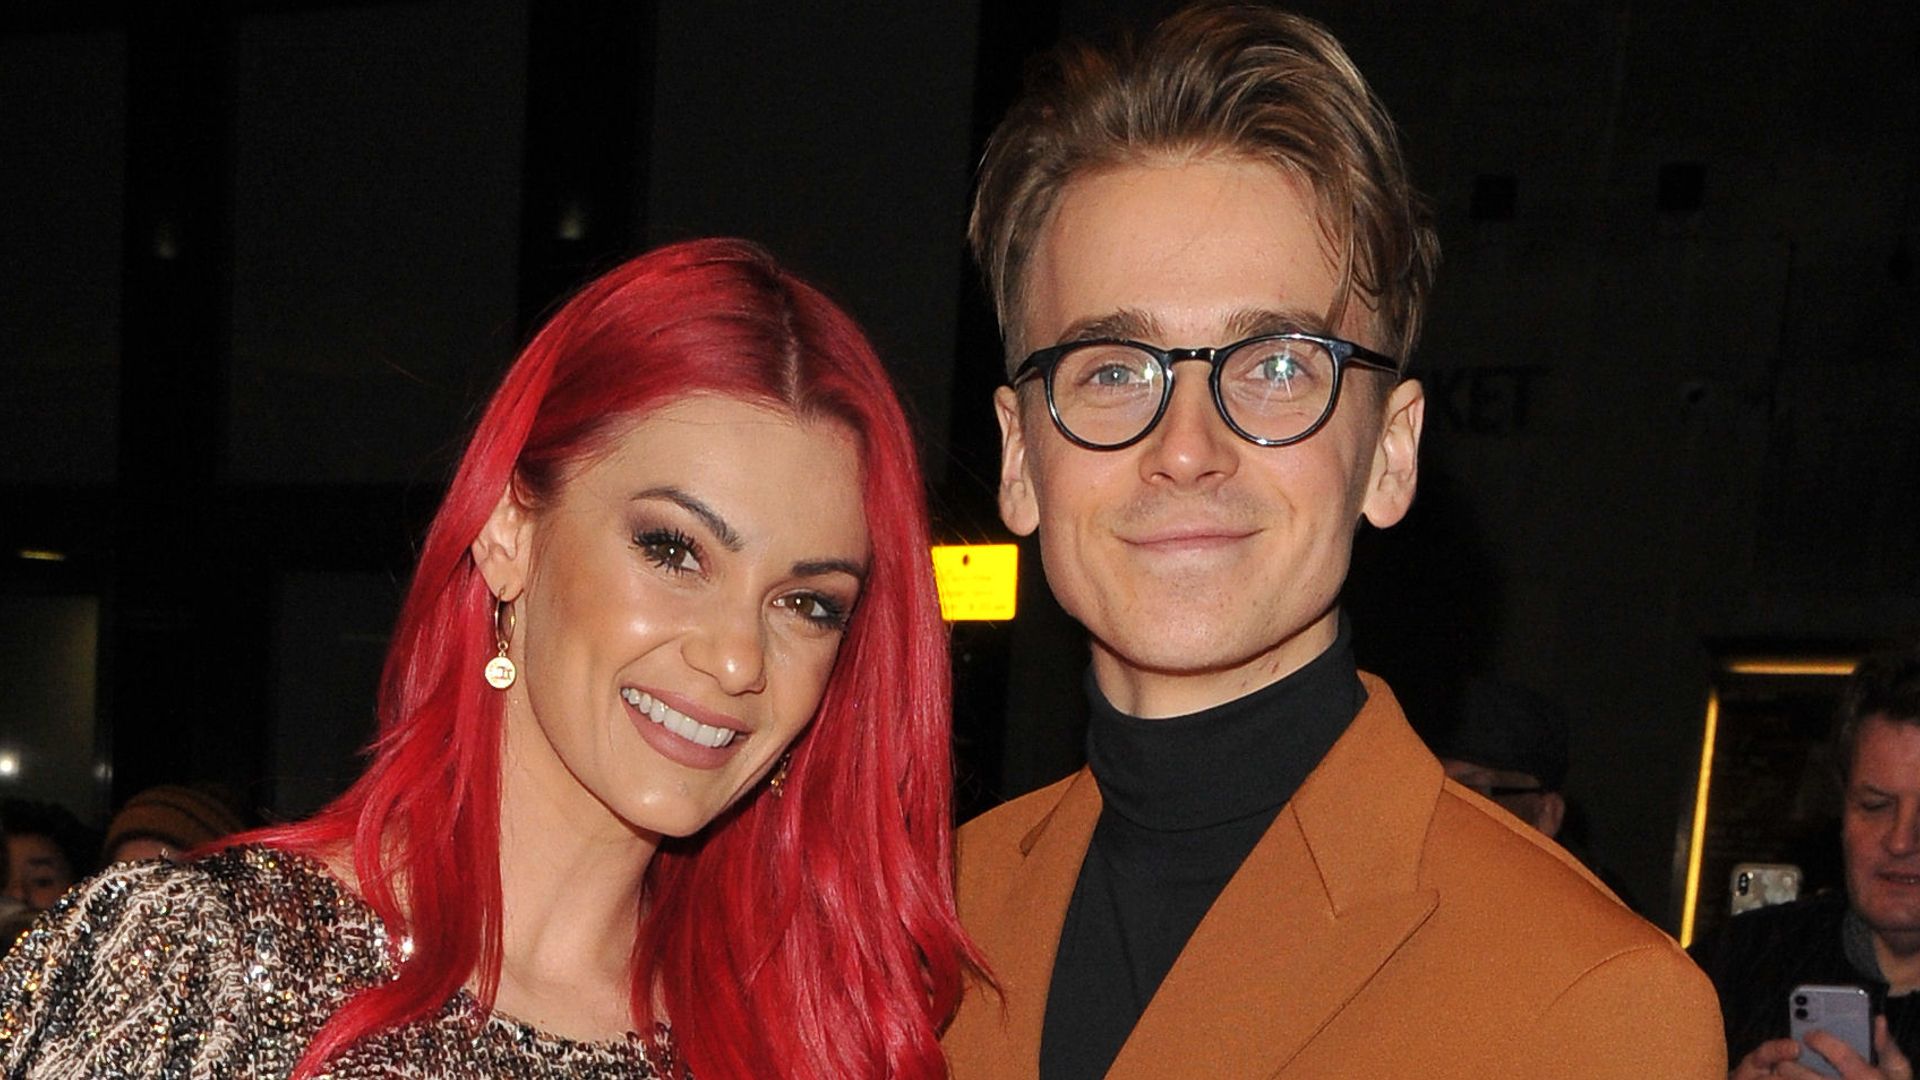 Dianne Buswell and Joe Sugg Whats On Stage Awards, Prince of Wales Theatre, Arrivals, London